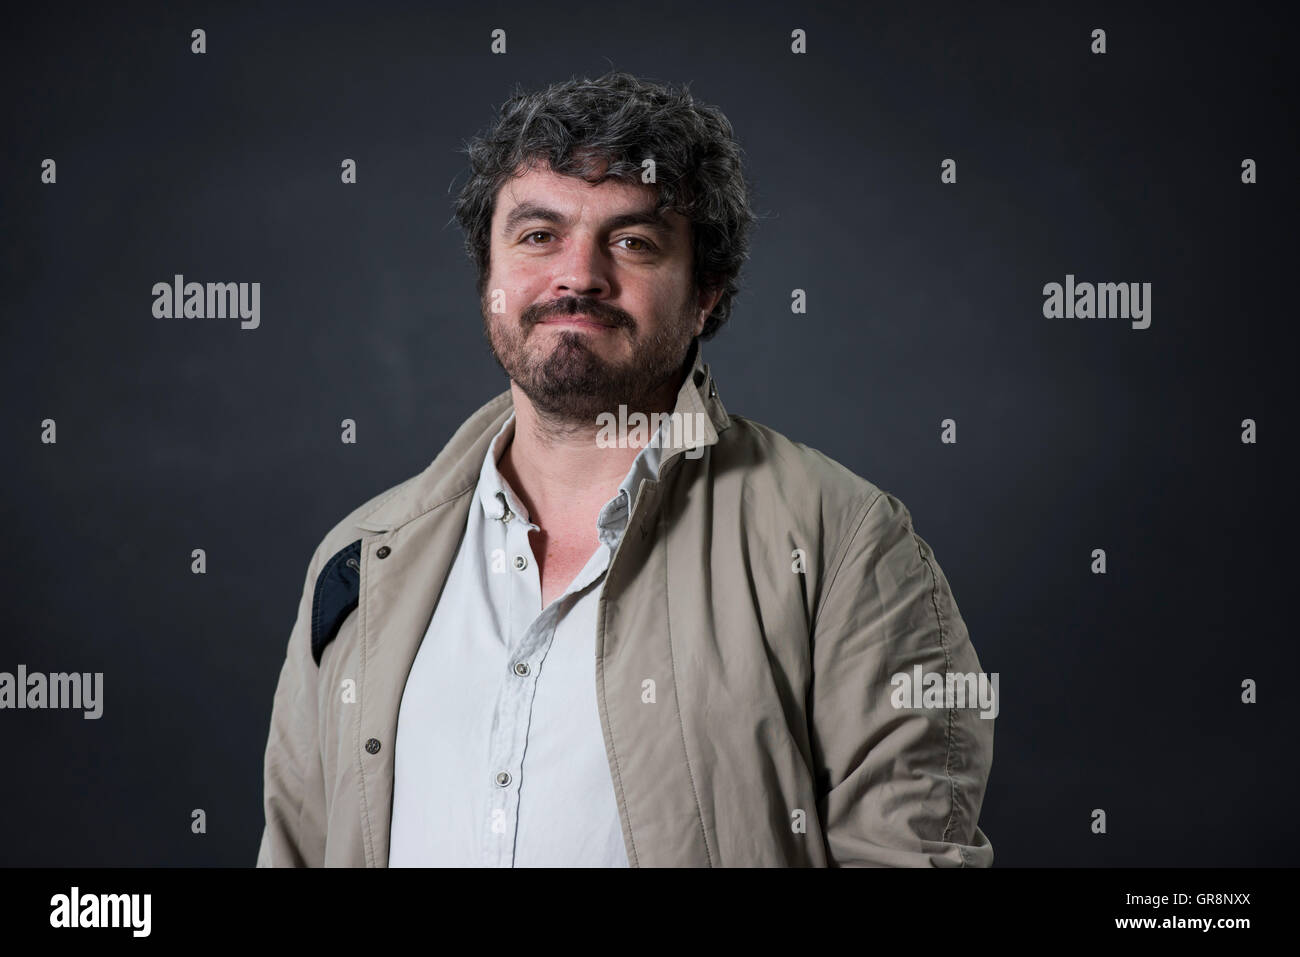 Poet and Podcaster Ross Sutherland. Stock Photo